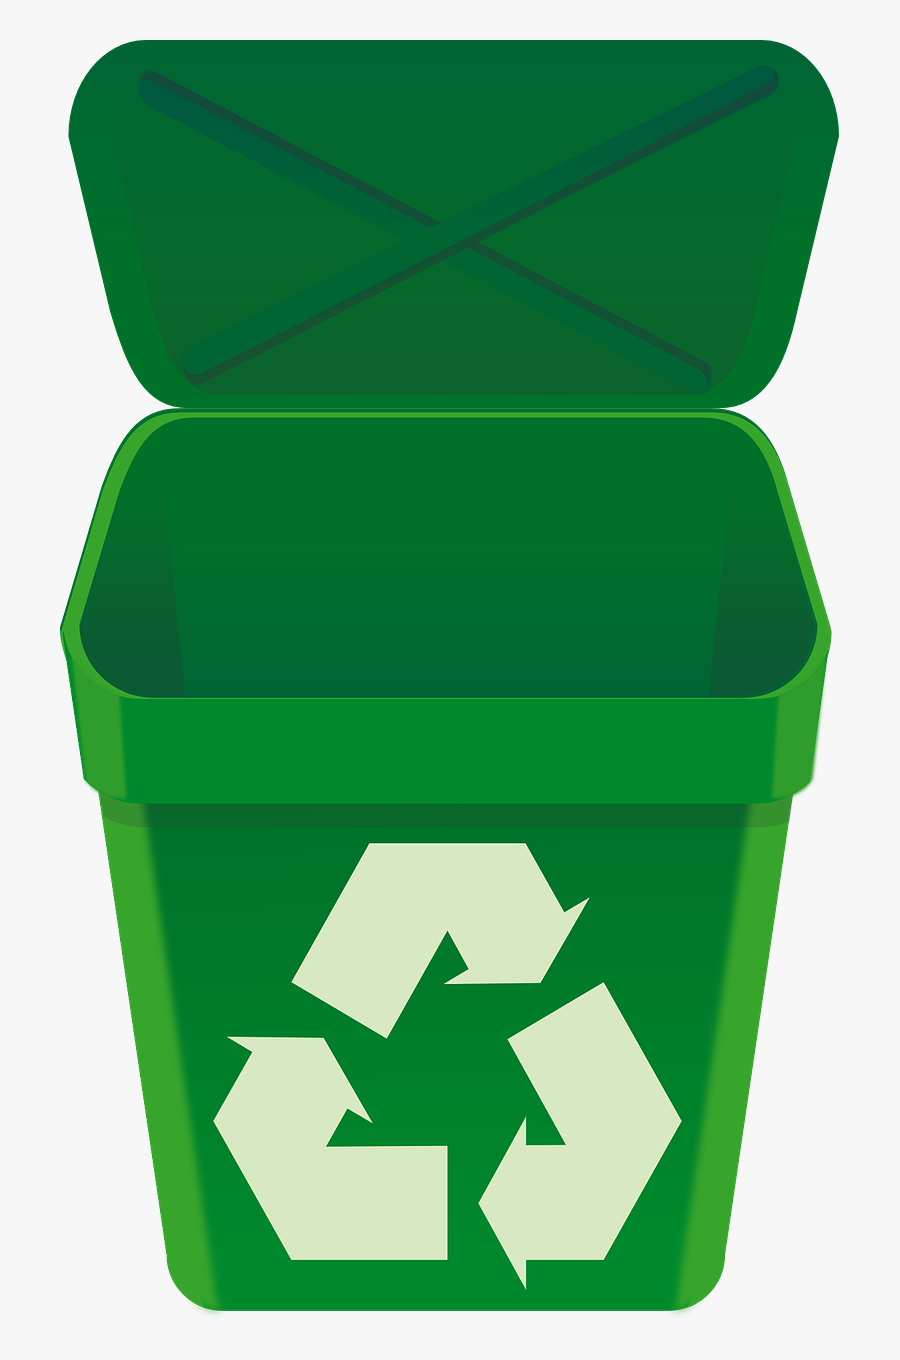 Open Trash Can Png - Open Recycling Bin Png, Transparent Clipart